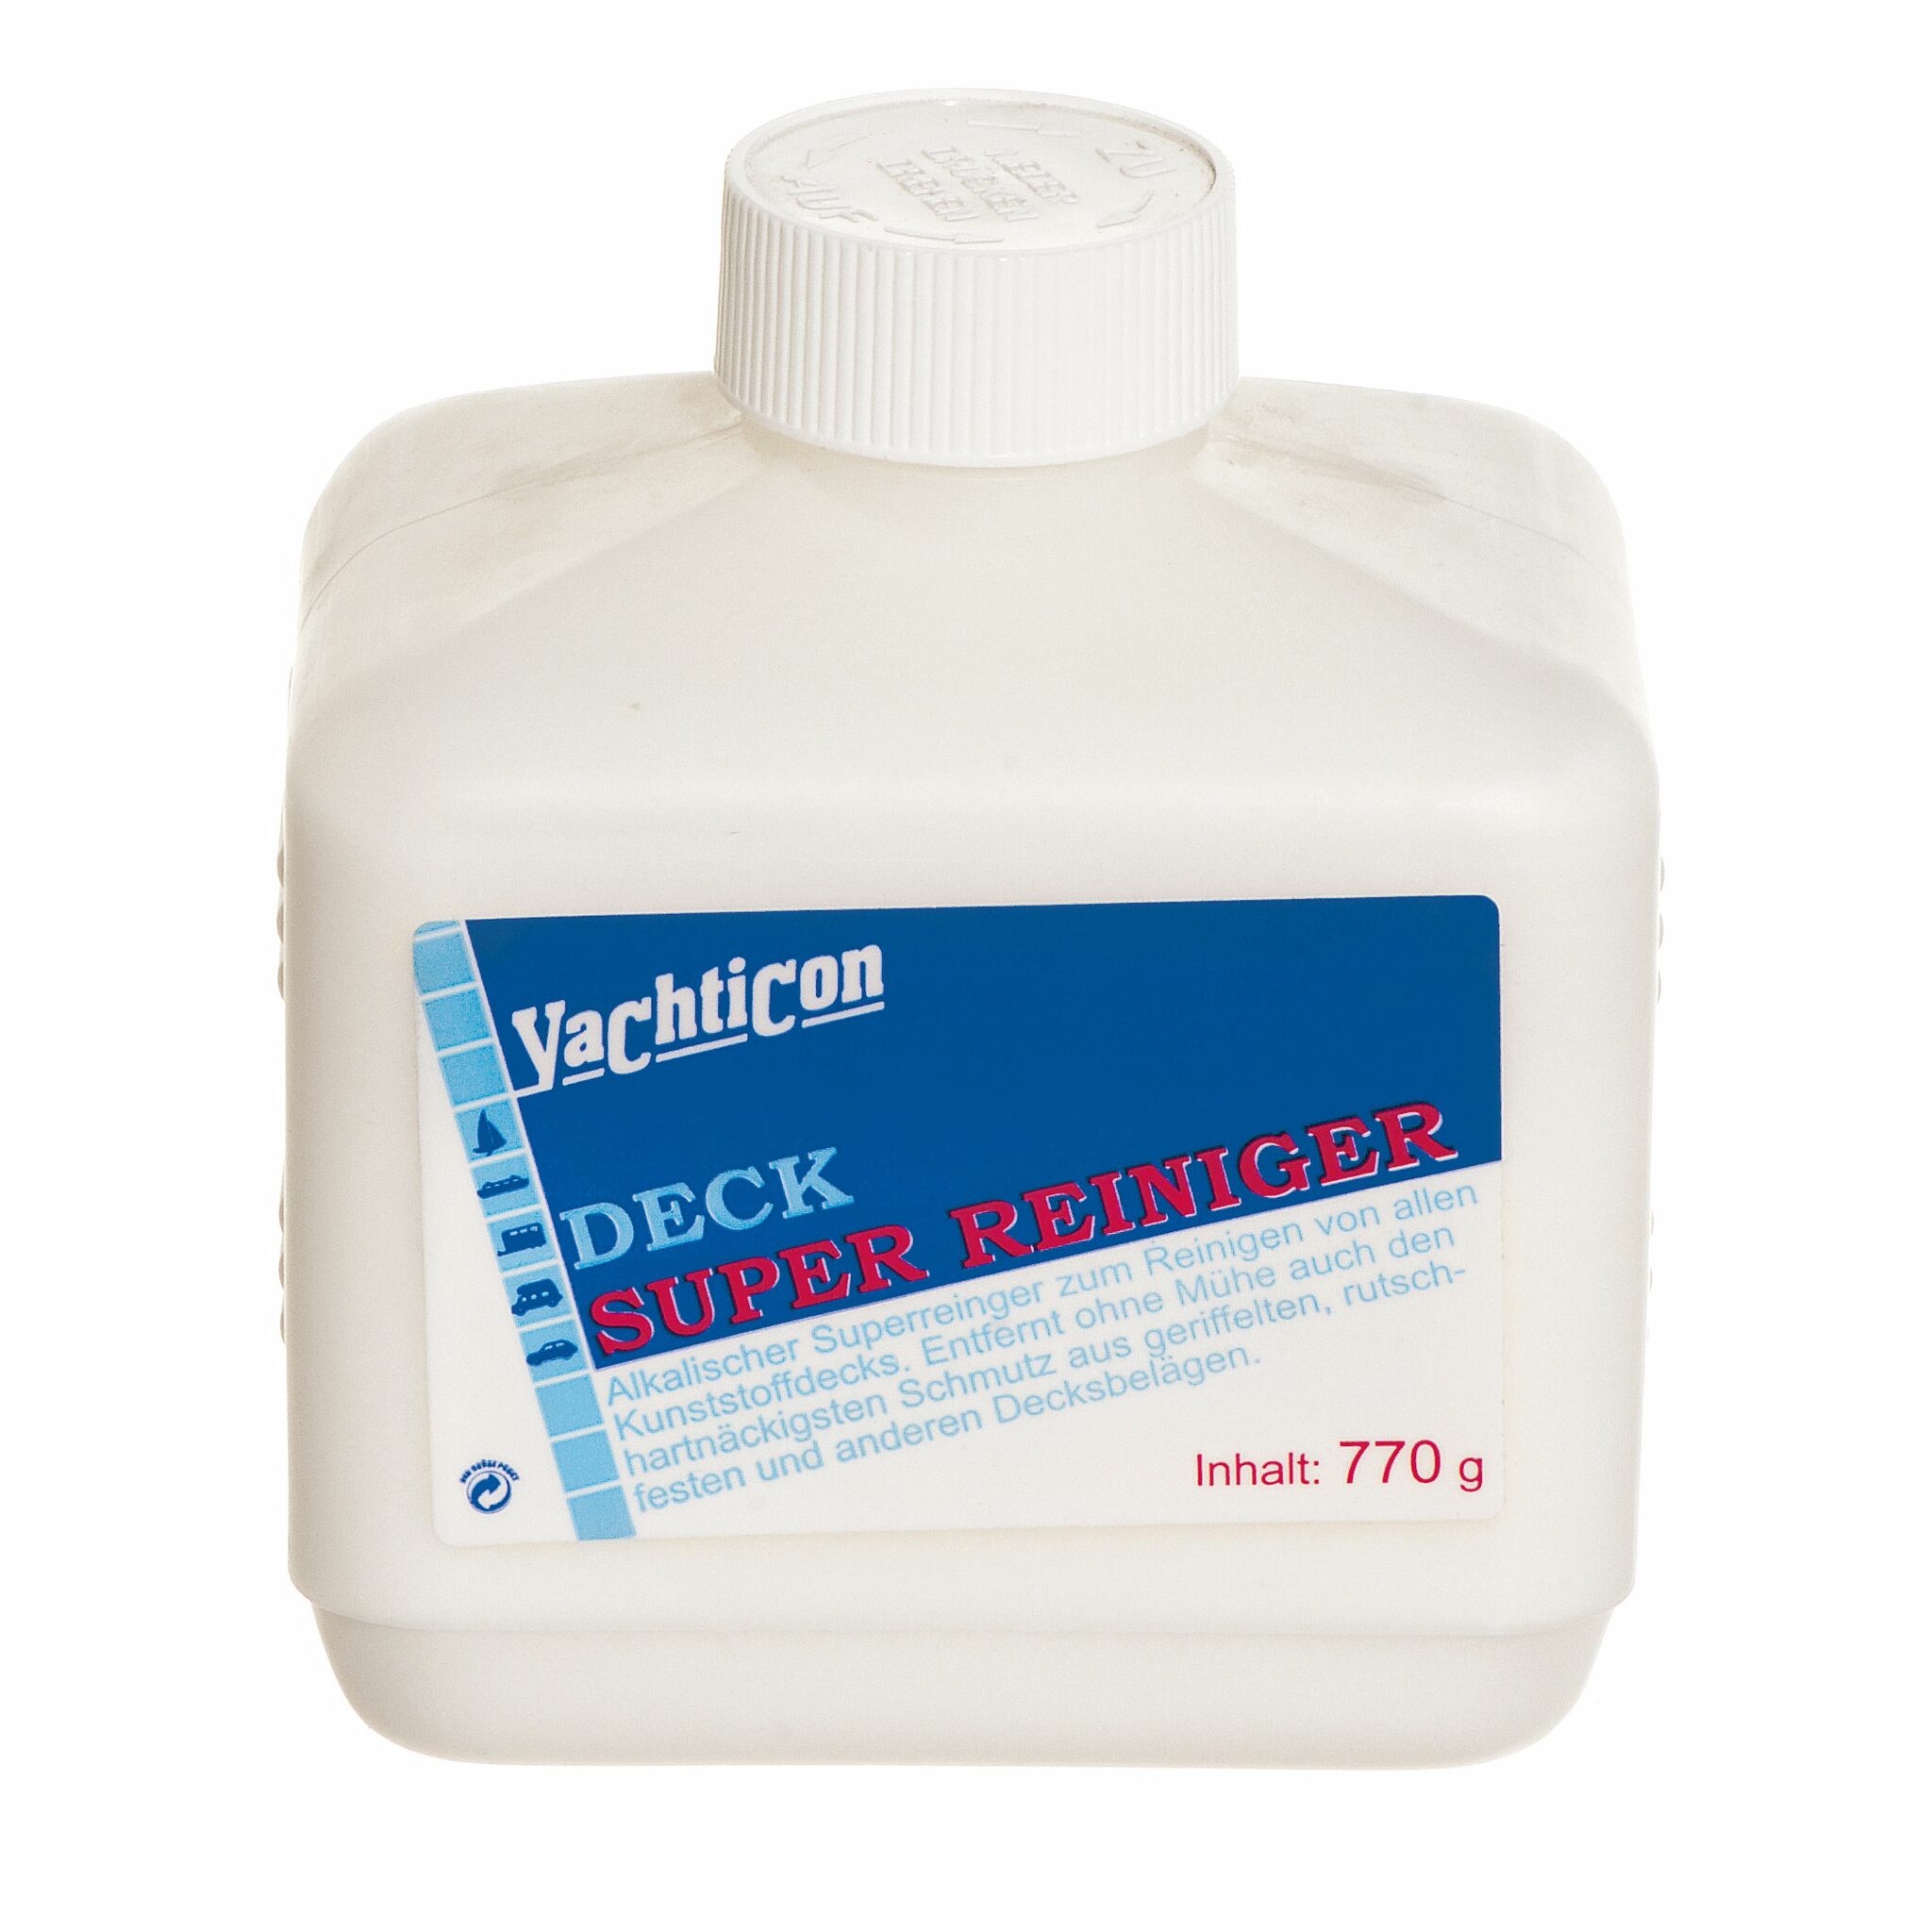 Yachticon Deck Super Cleaner